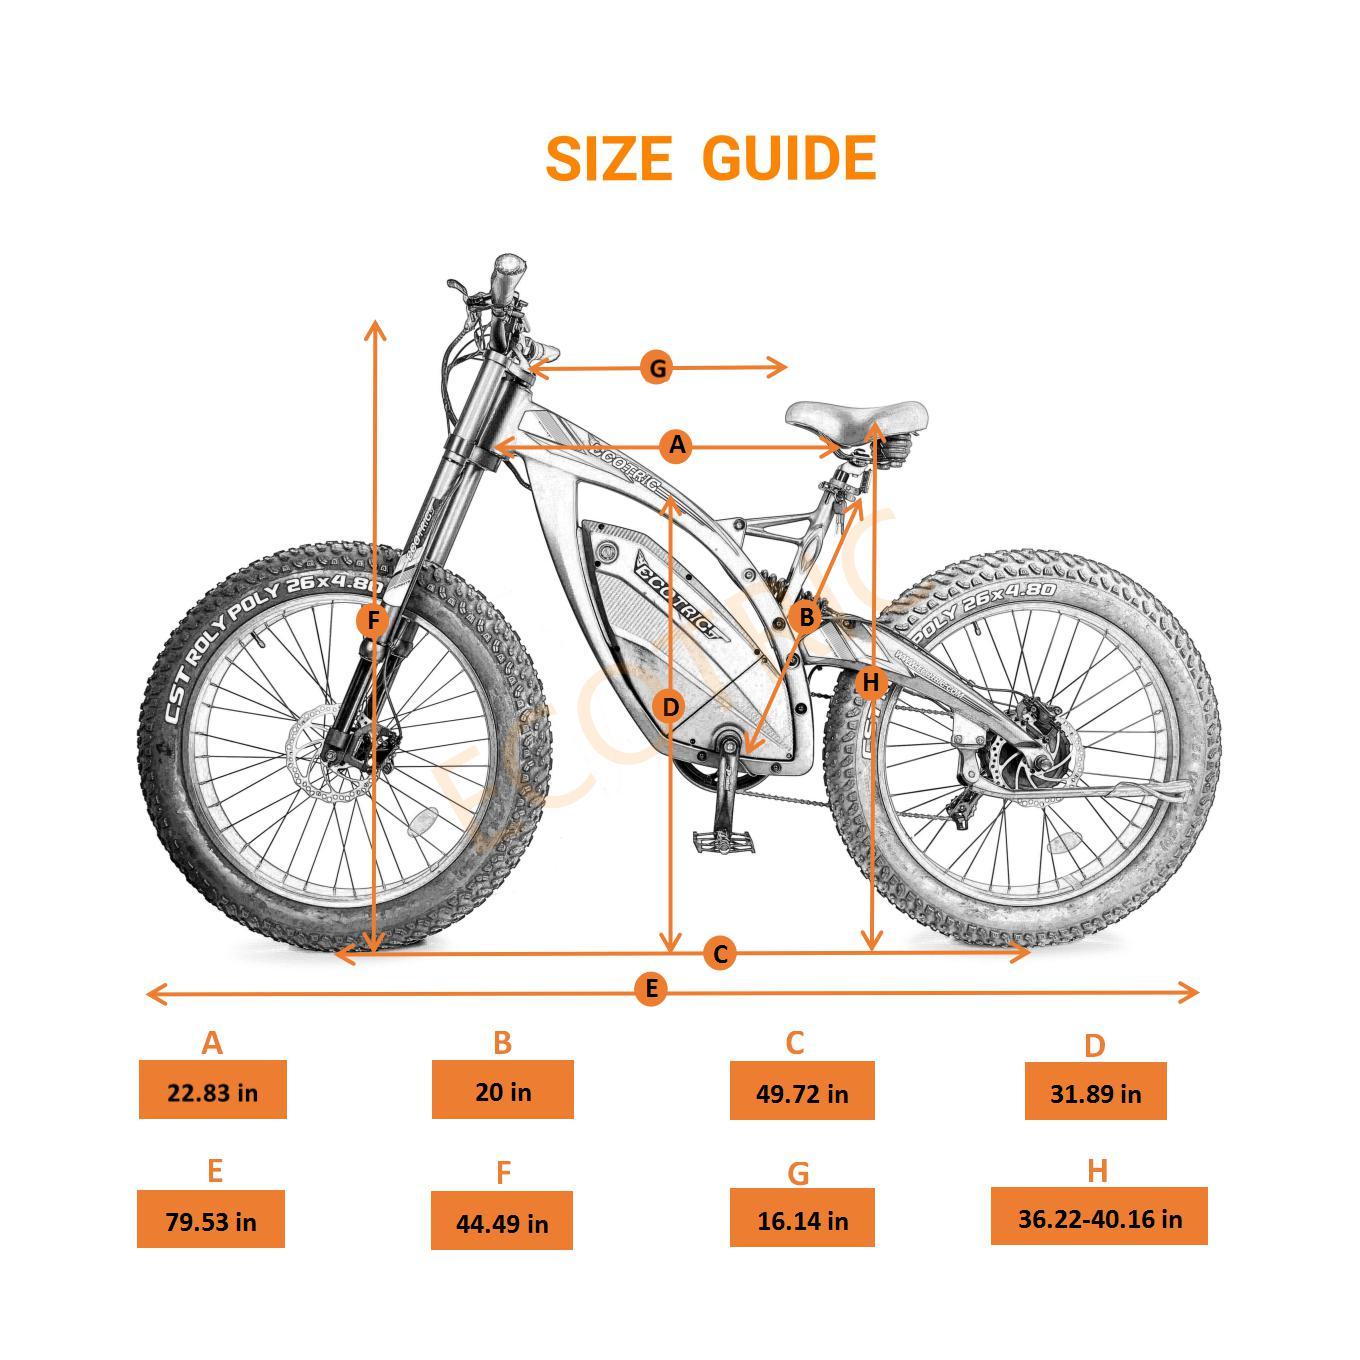 Ecotric Bison Electric Bike Size Guide